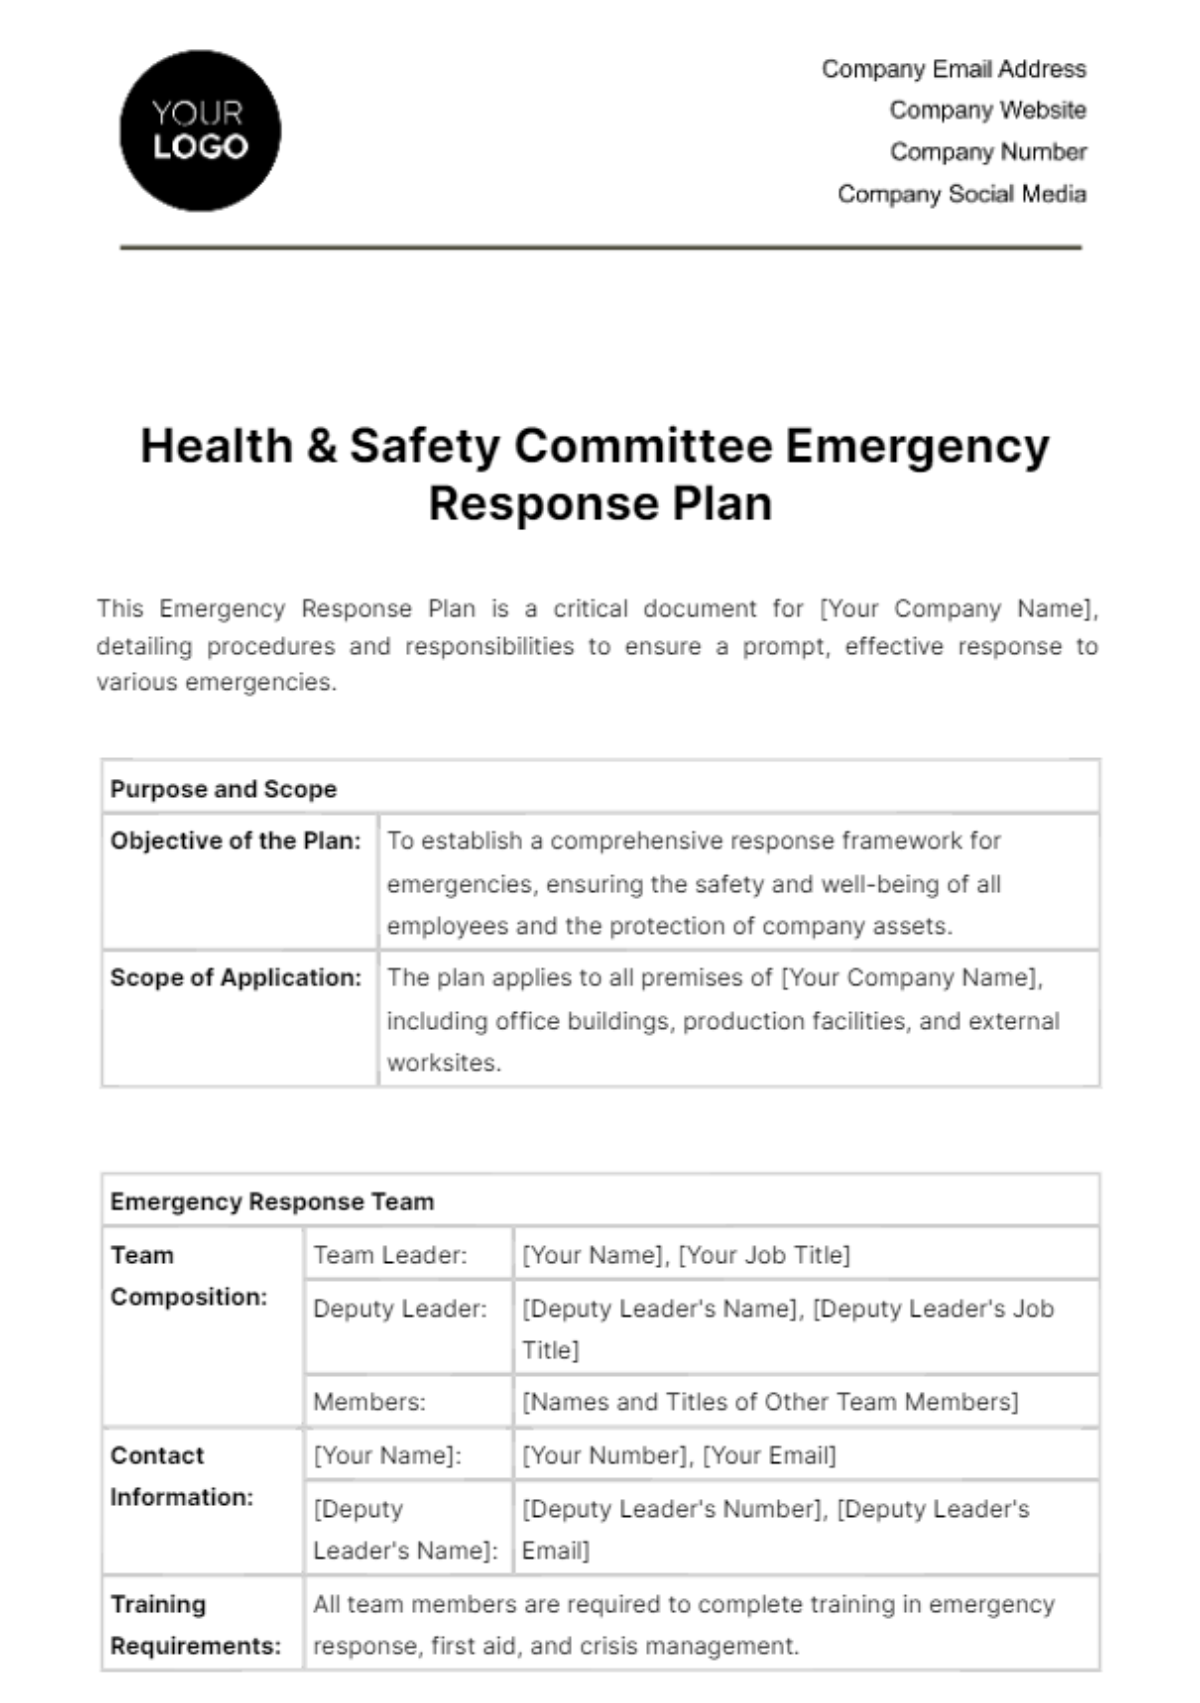 Free Health & Safety Committee Emergency Response Plan Template